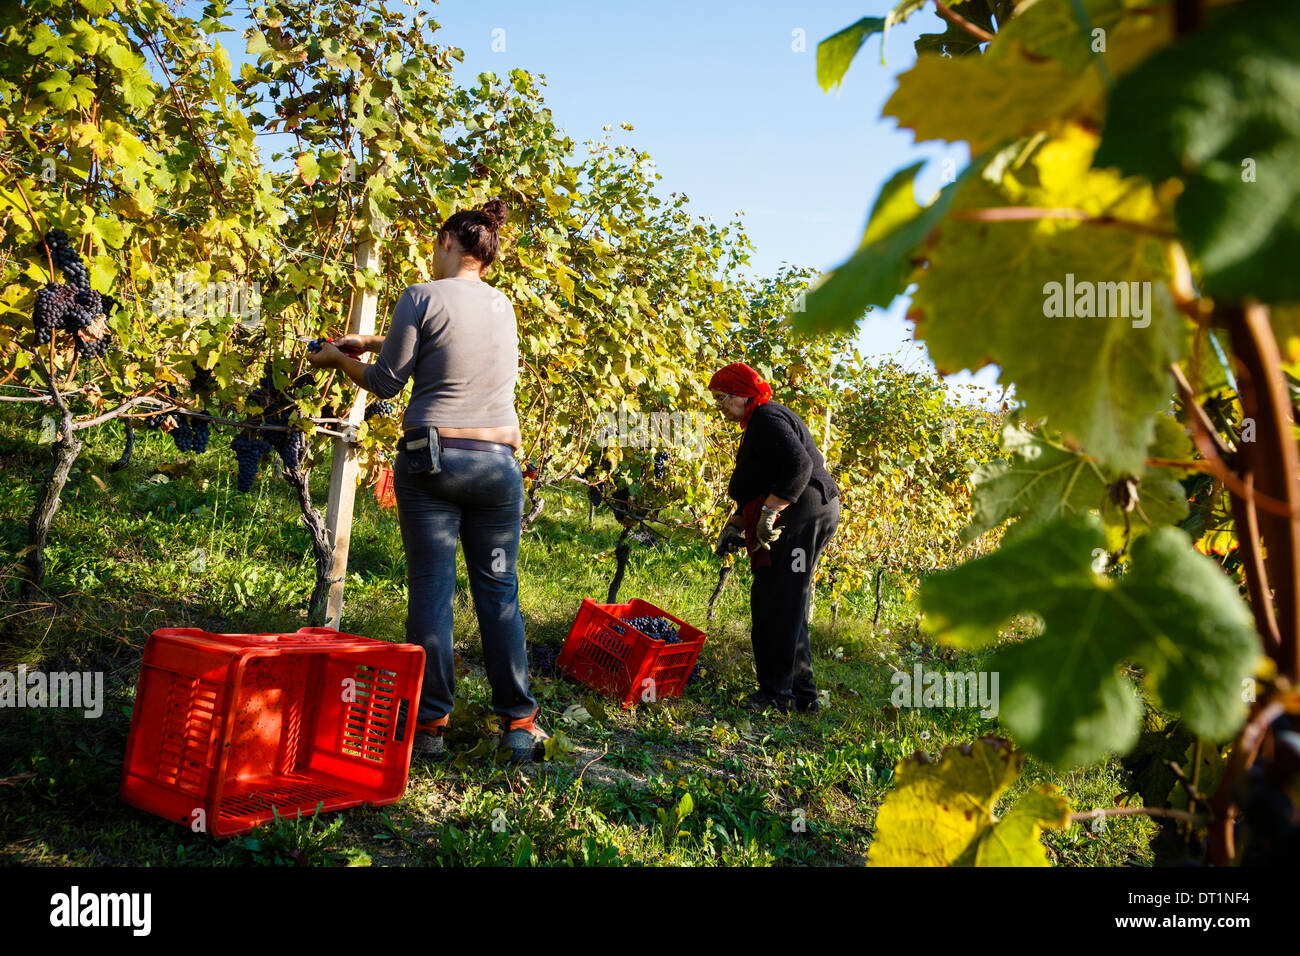 People harvesting grapes in a vineyard near Treiso, Langhe, Cuneo district, Piedmont, Italy, Europe Stock Photo